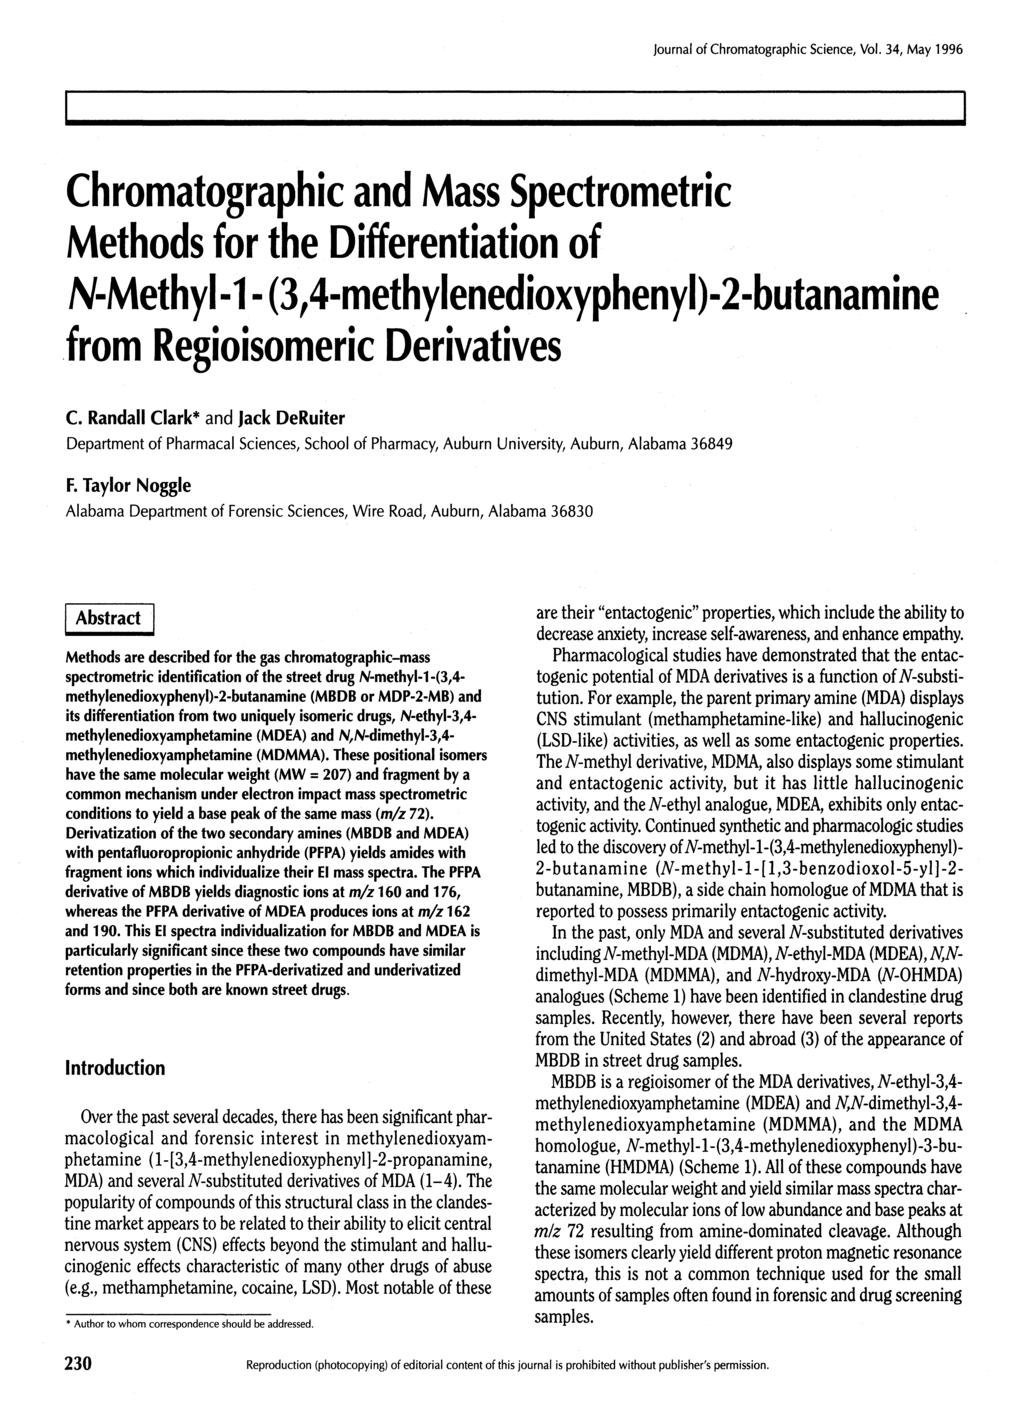 Chromatographic and Mass Spectrometry Methods for the Differentiation of N-Methyl-1-(3,4-methylenedioxyphenyO^-butanamine from Regioisomeric Derivatives C.